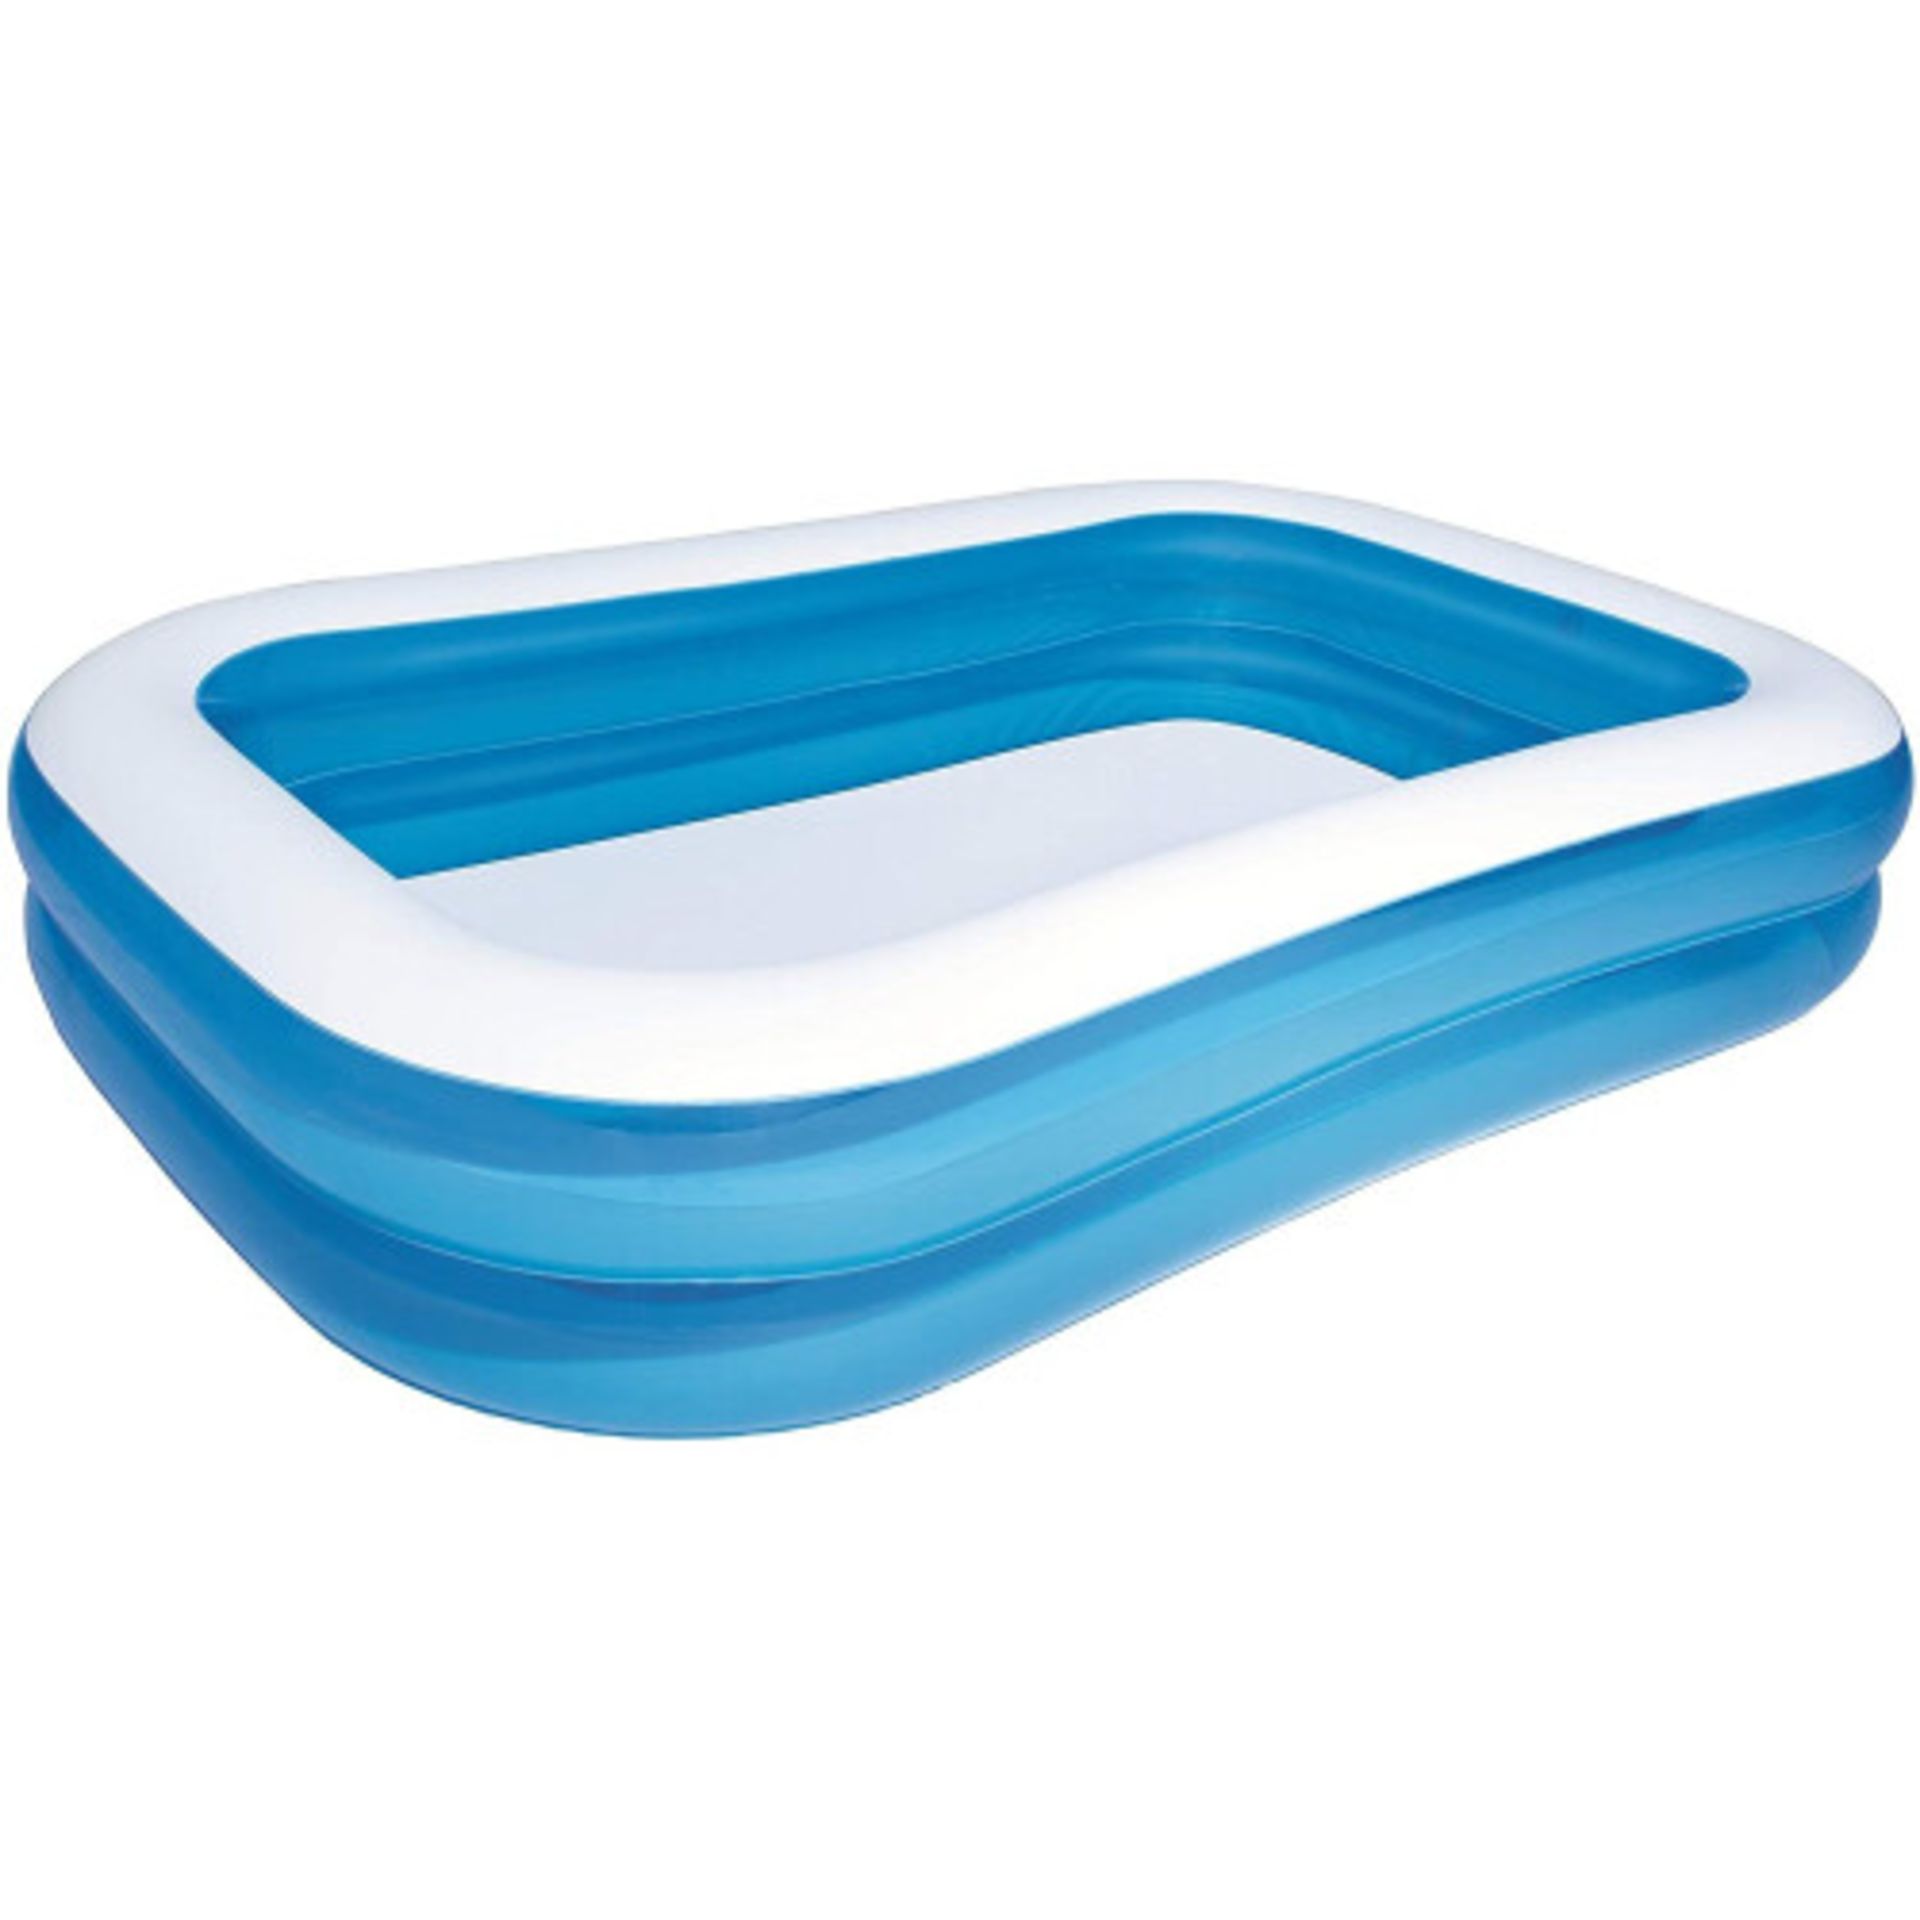 3 X BRAND NEW BESTWAY SPLASH AND PLAY LARGE FAMILY INFLATABLE POOL - IN 1 BOX (CODE : 54006 ) - - Image 2 of 2